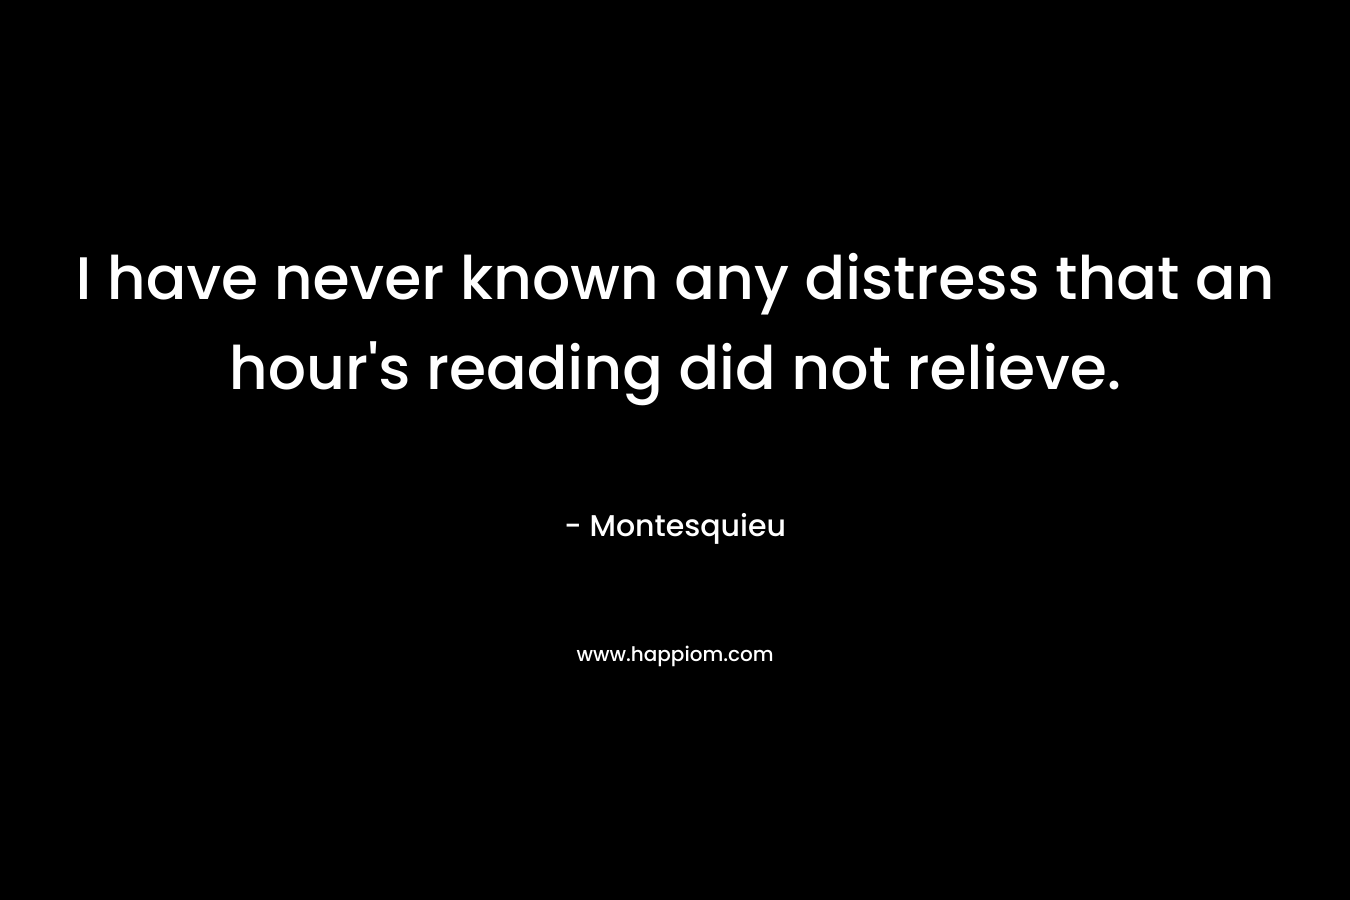 I have never known any distress that an hour's reading did not relieve.